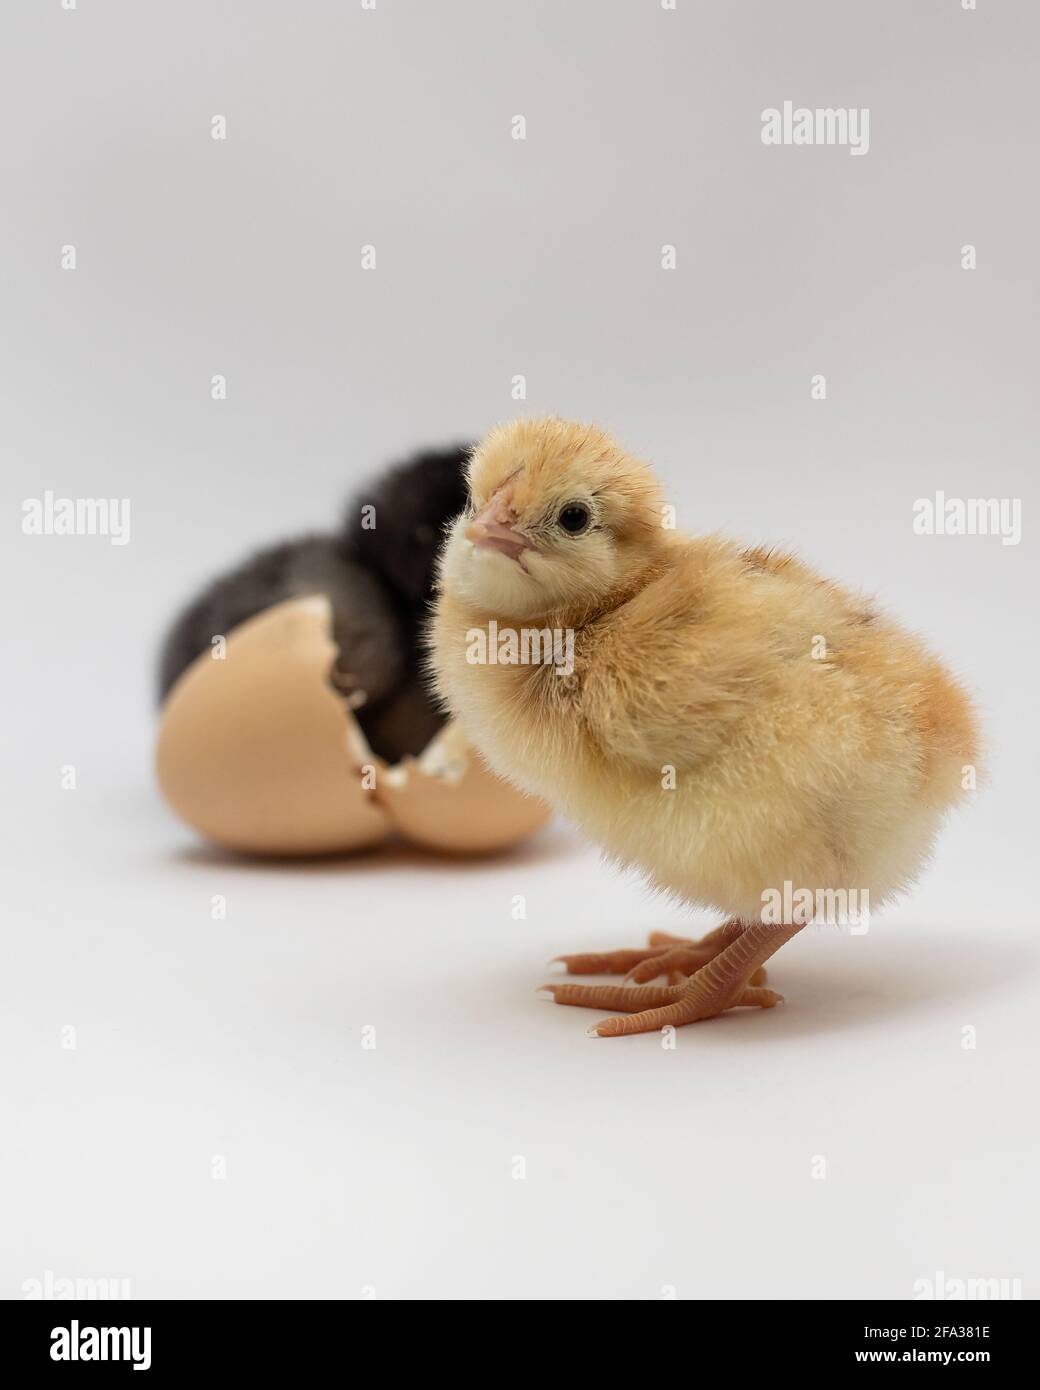 Little yellow chicken isolated on white background. Chicks just born. Stock Photo